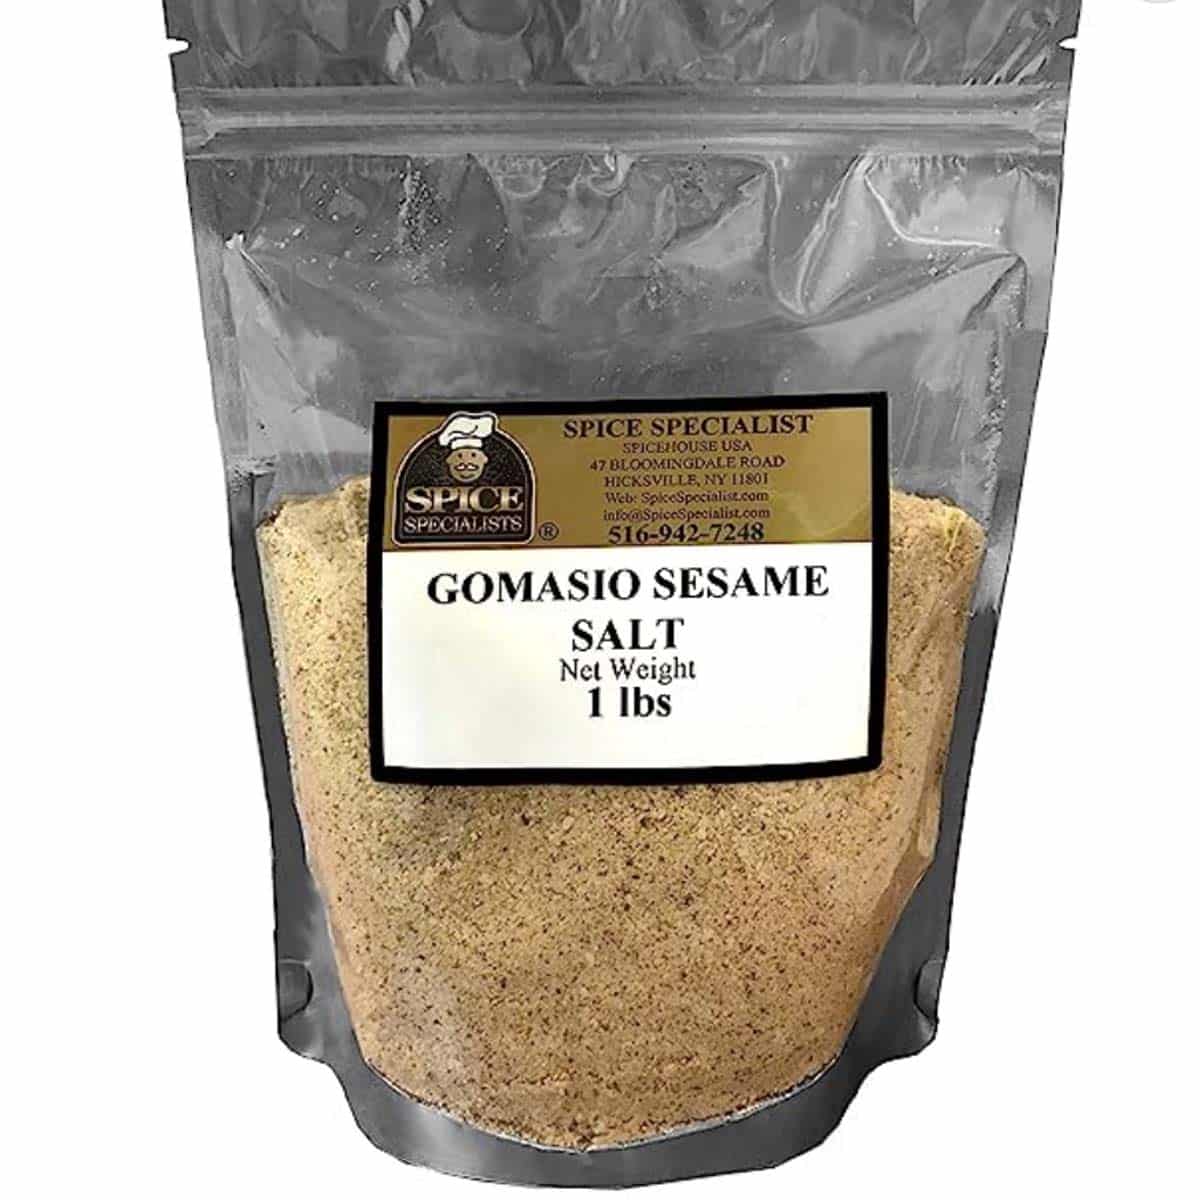 Image of Gomasio, a traditional Japanese seasoning made from toasted sesame seeds and salt